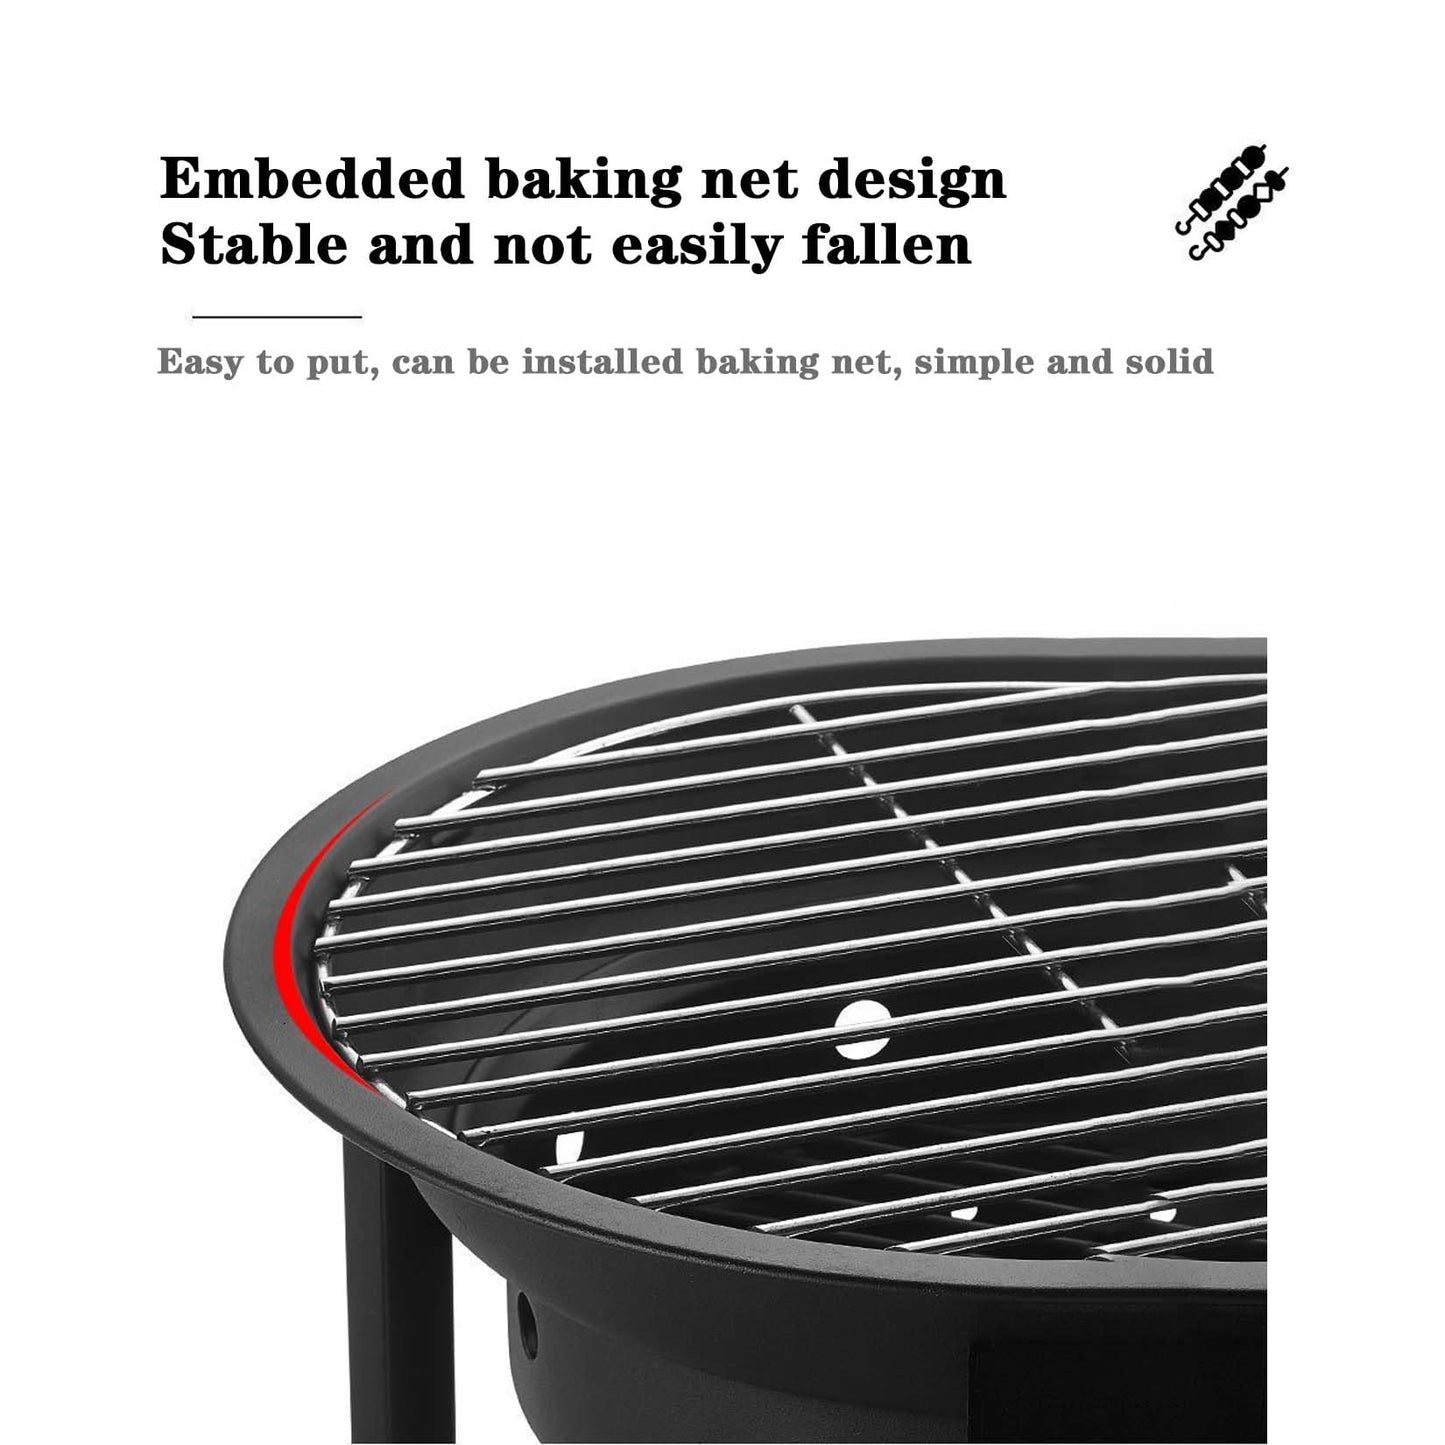 Portable Outdoor Barbecue Grill RV Charcoal Tripod Foldable Portable Grill